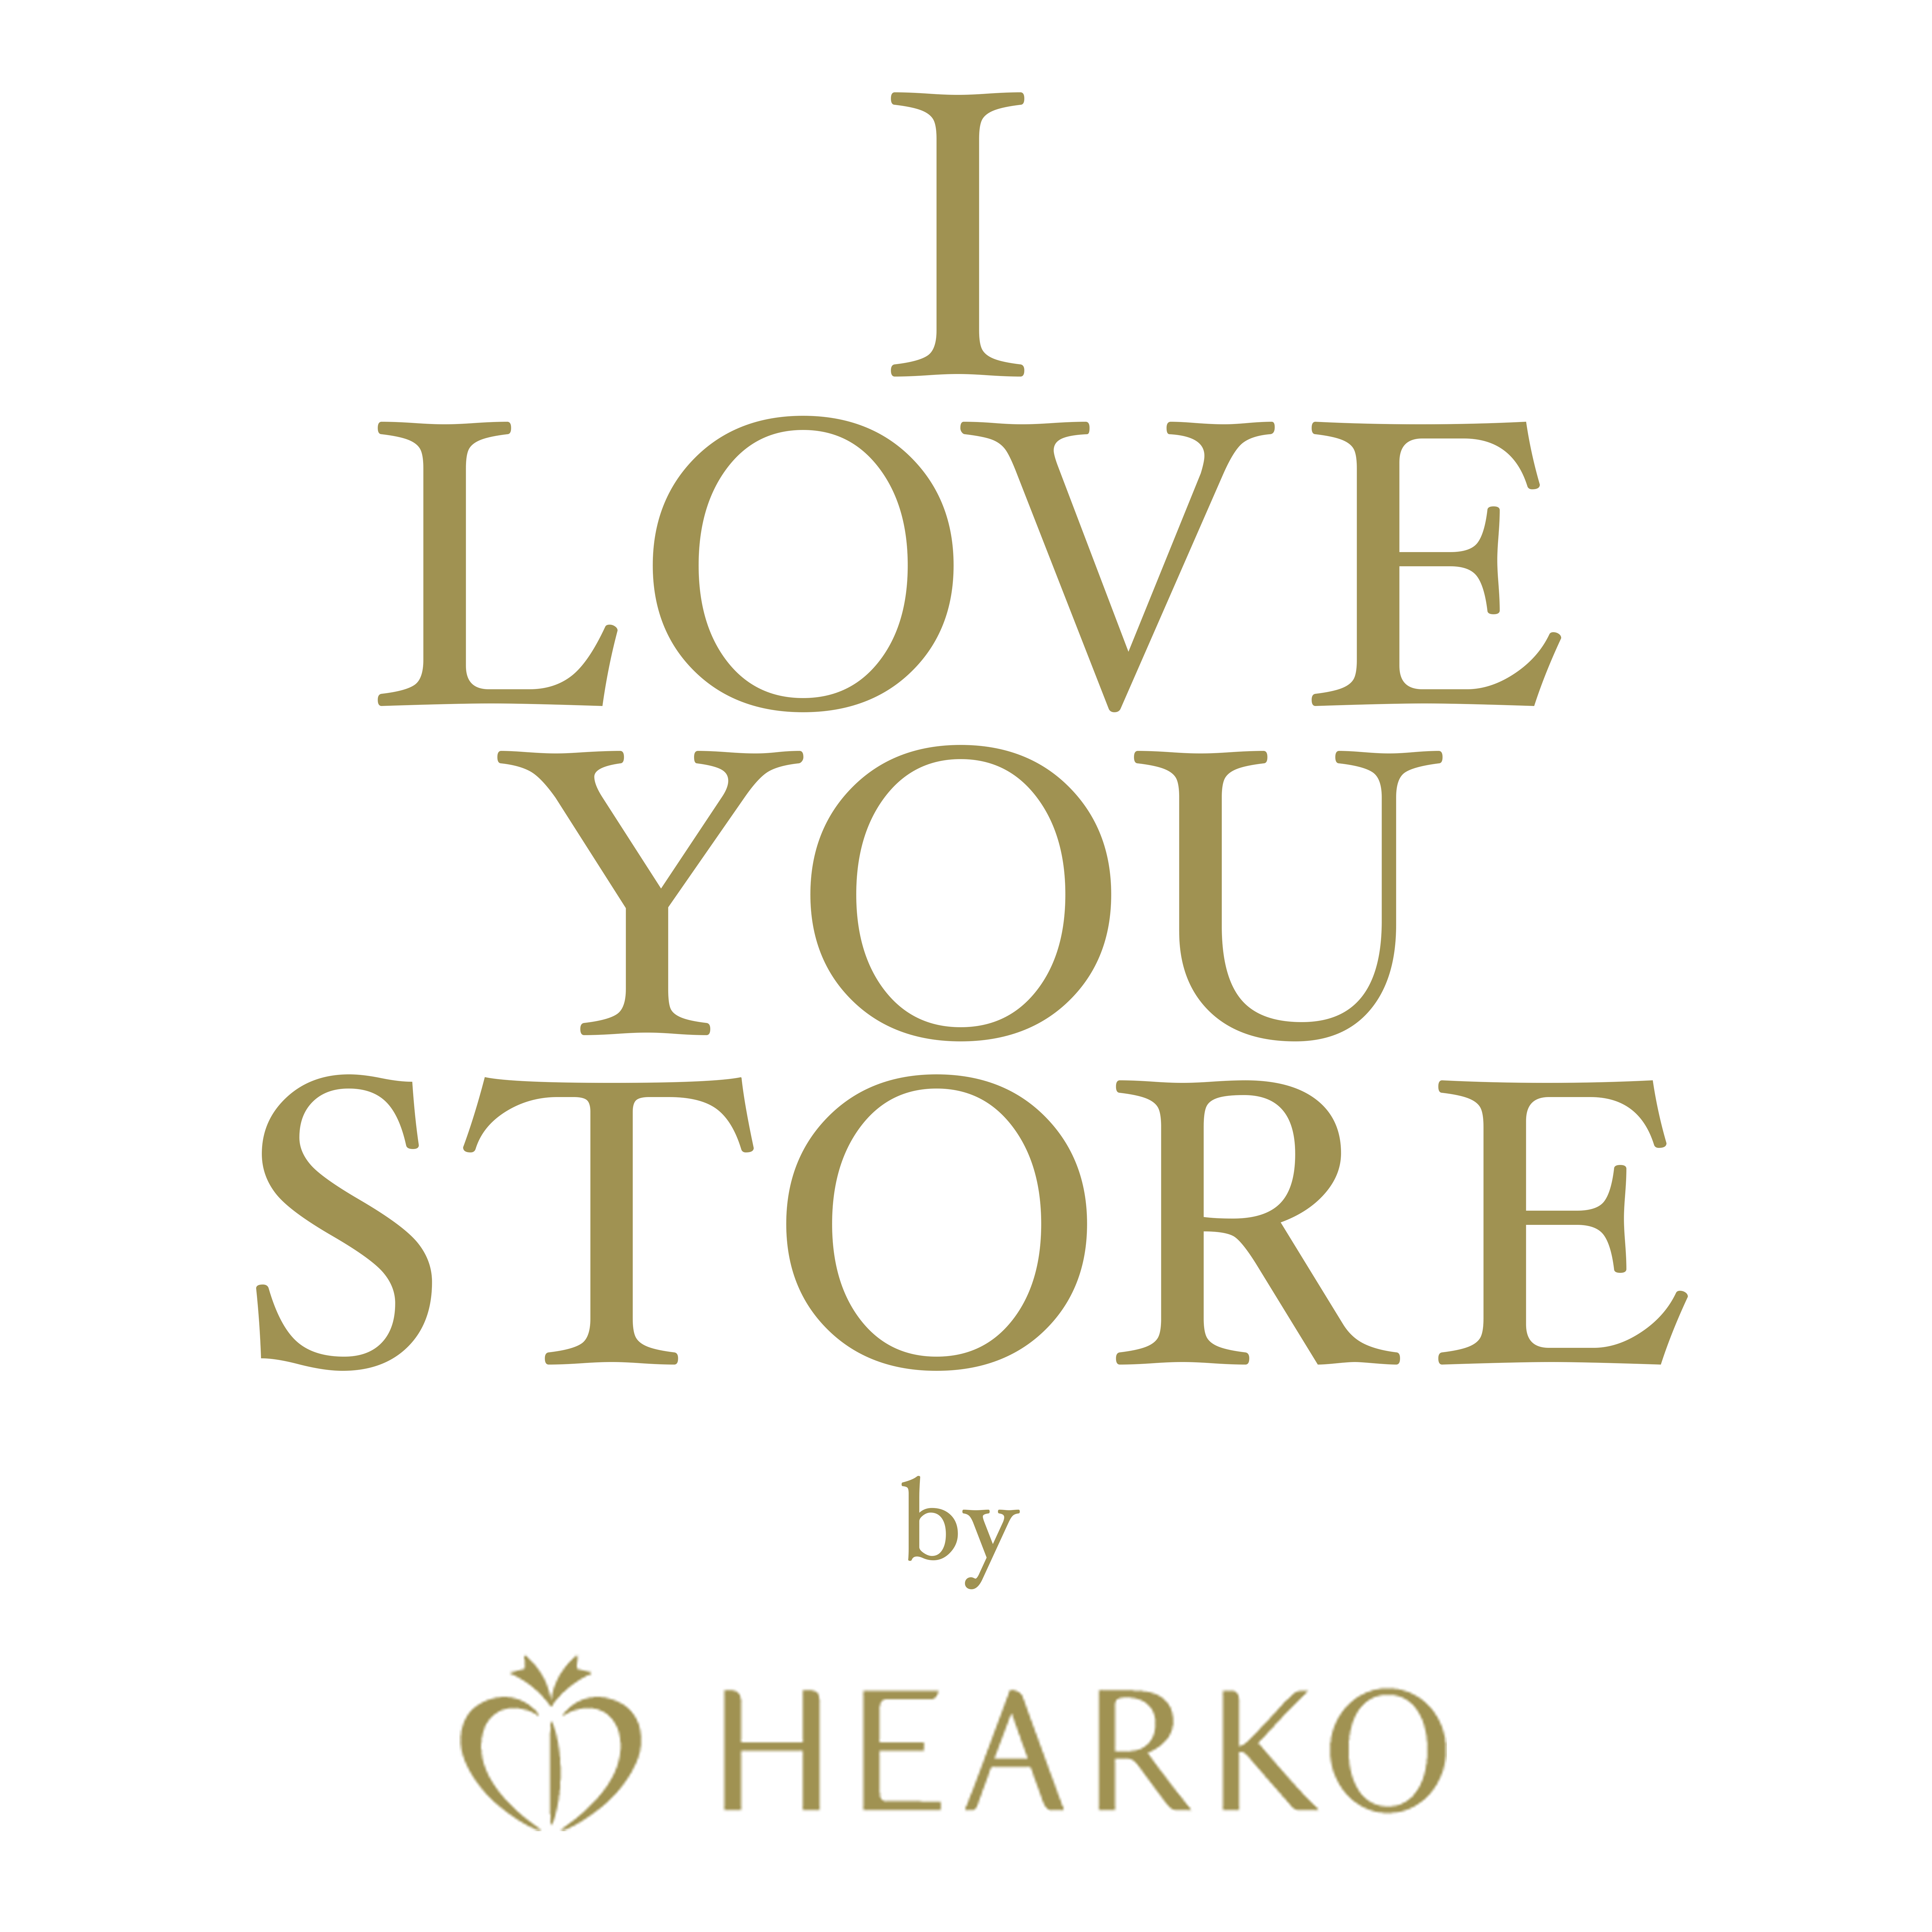 I LOVE YOU STORE by Hearko